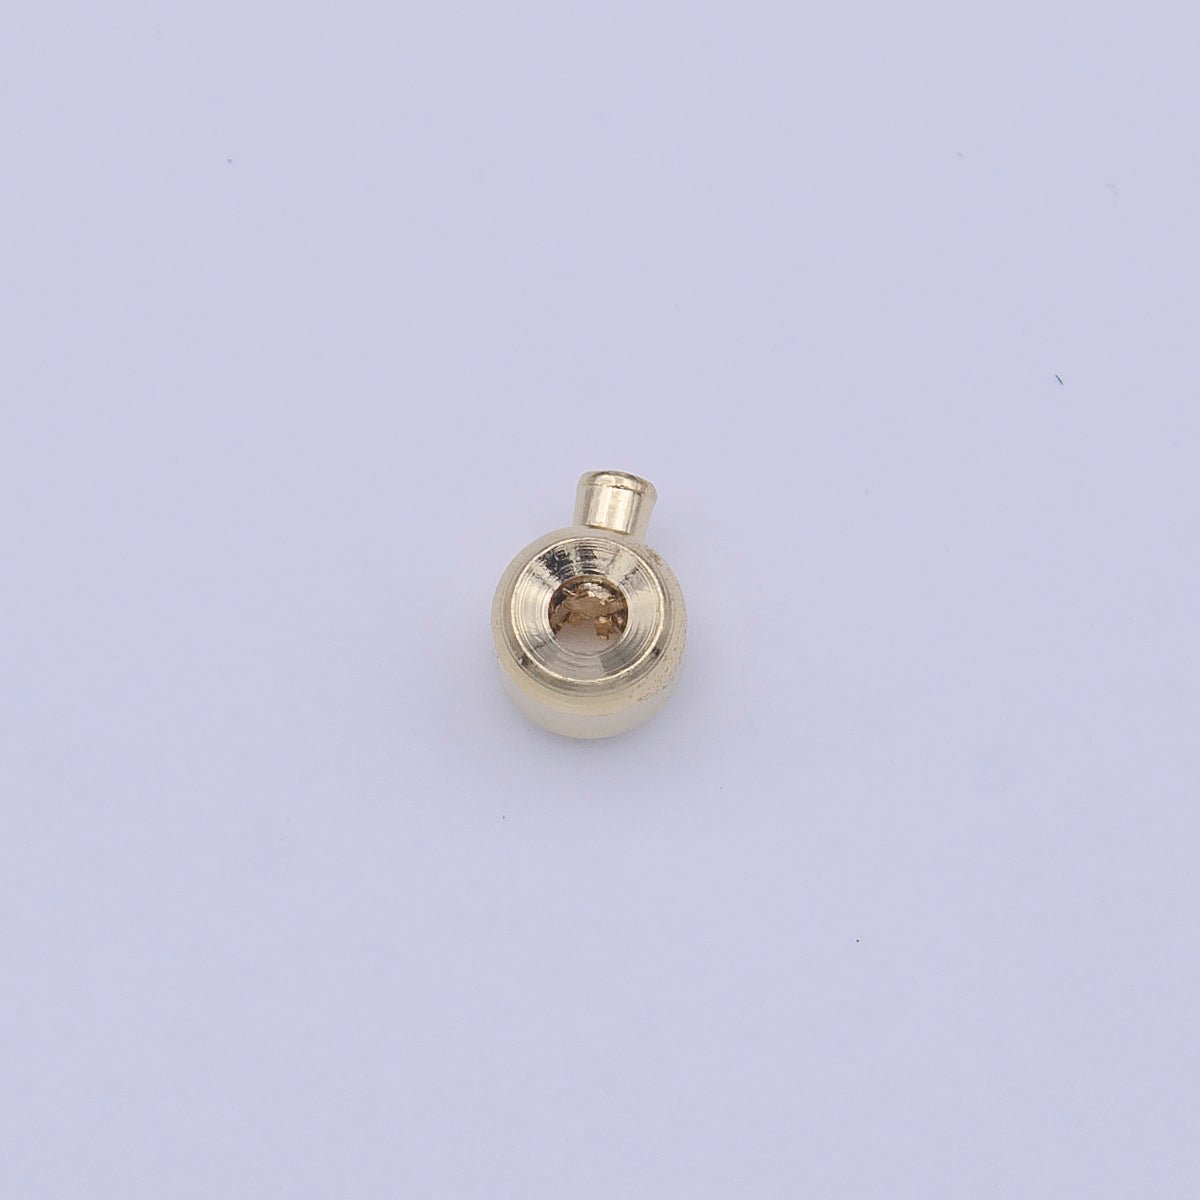 12 Pieces Gold Filled Jewelry Bead Connector Link Crimp Supply Making in Gold & Silver | B-608 B-611 - DLUXCA